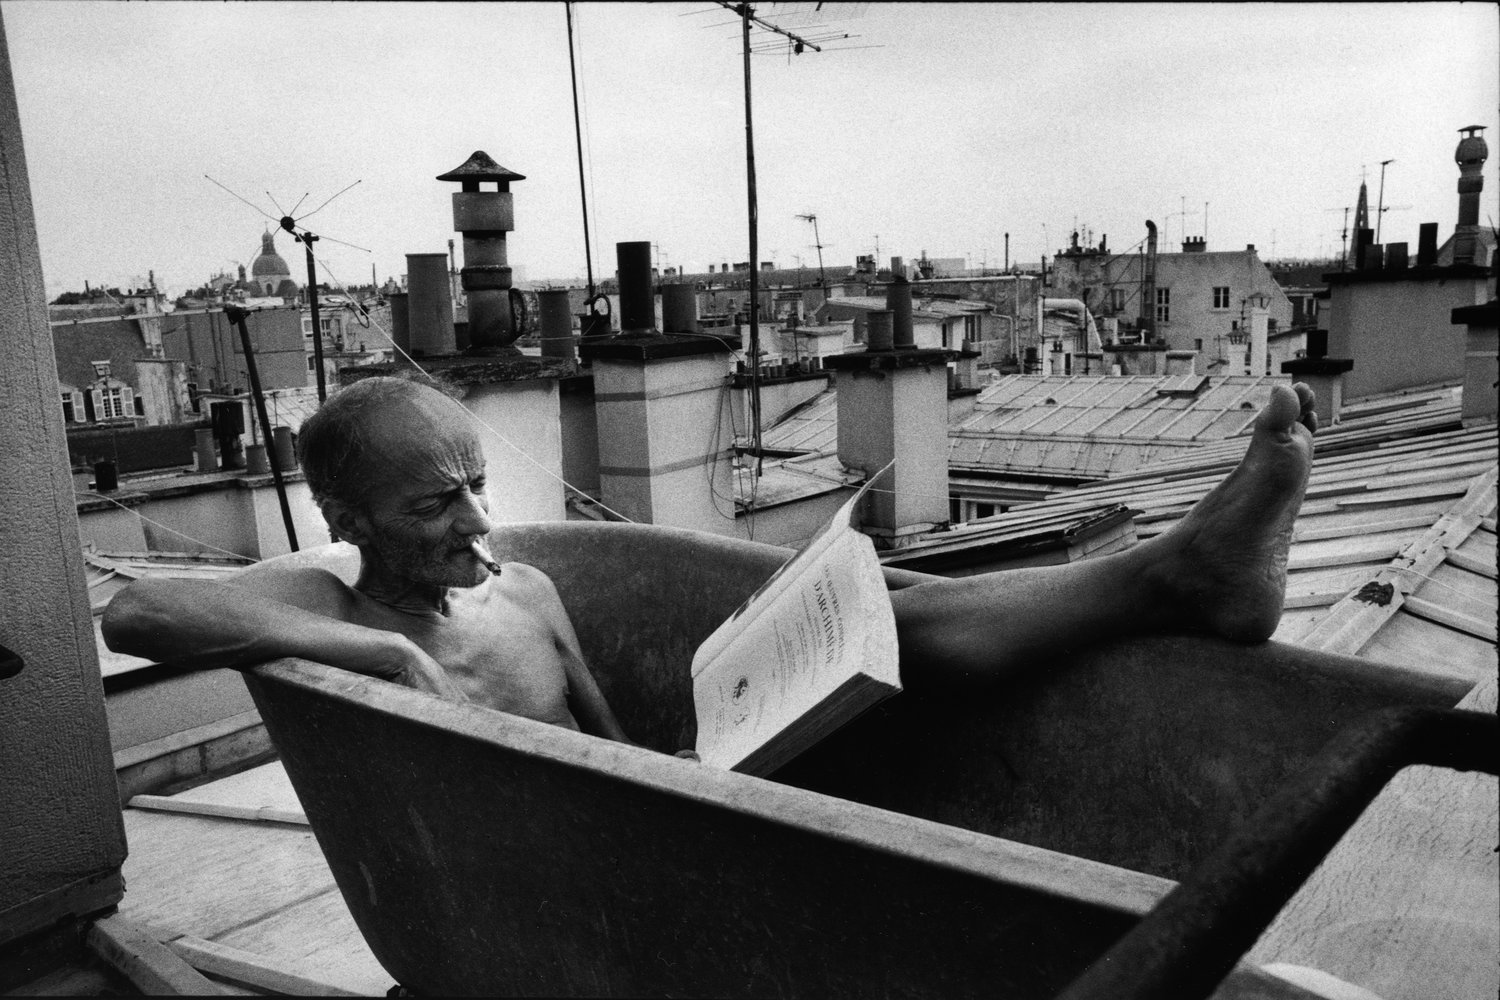 French man in an outdoor bathtub reading a book - Photo by Peter Turnley